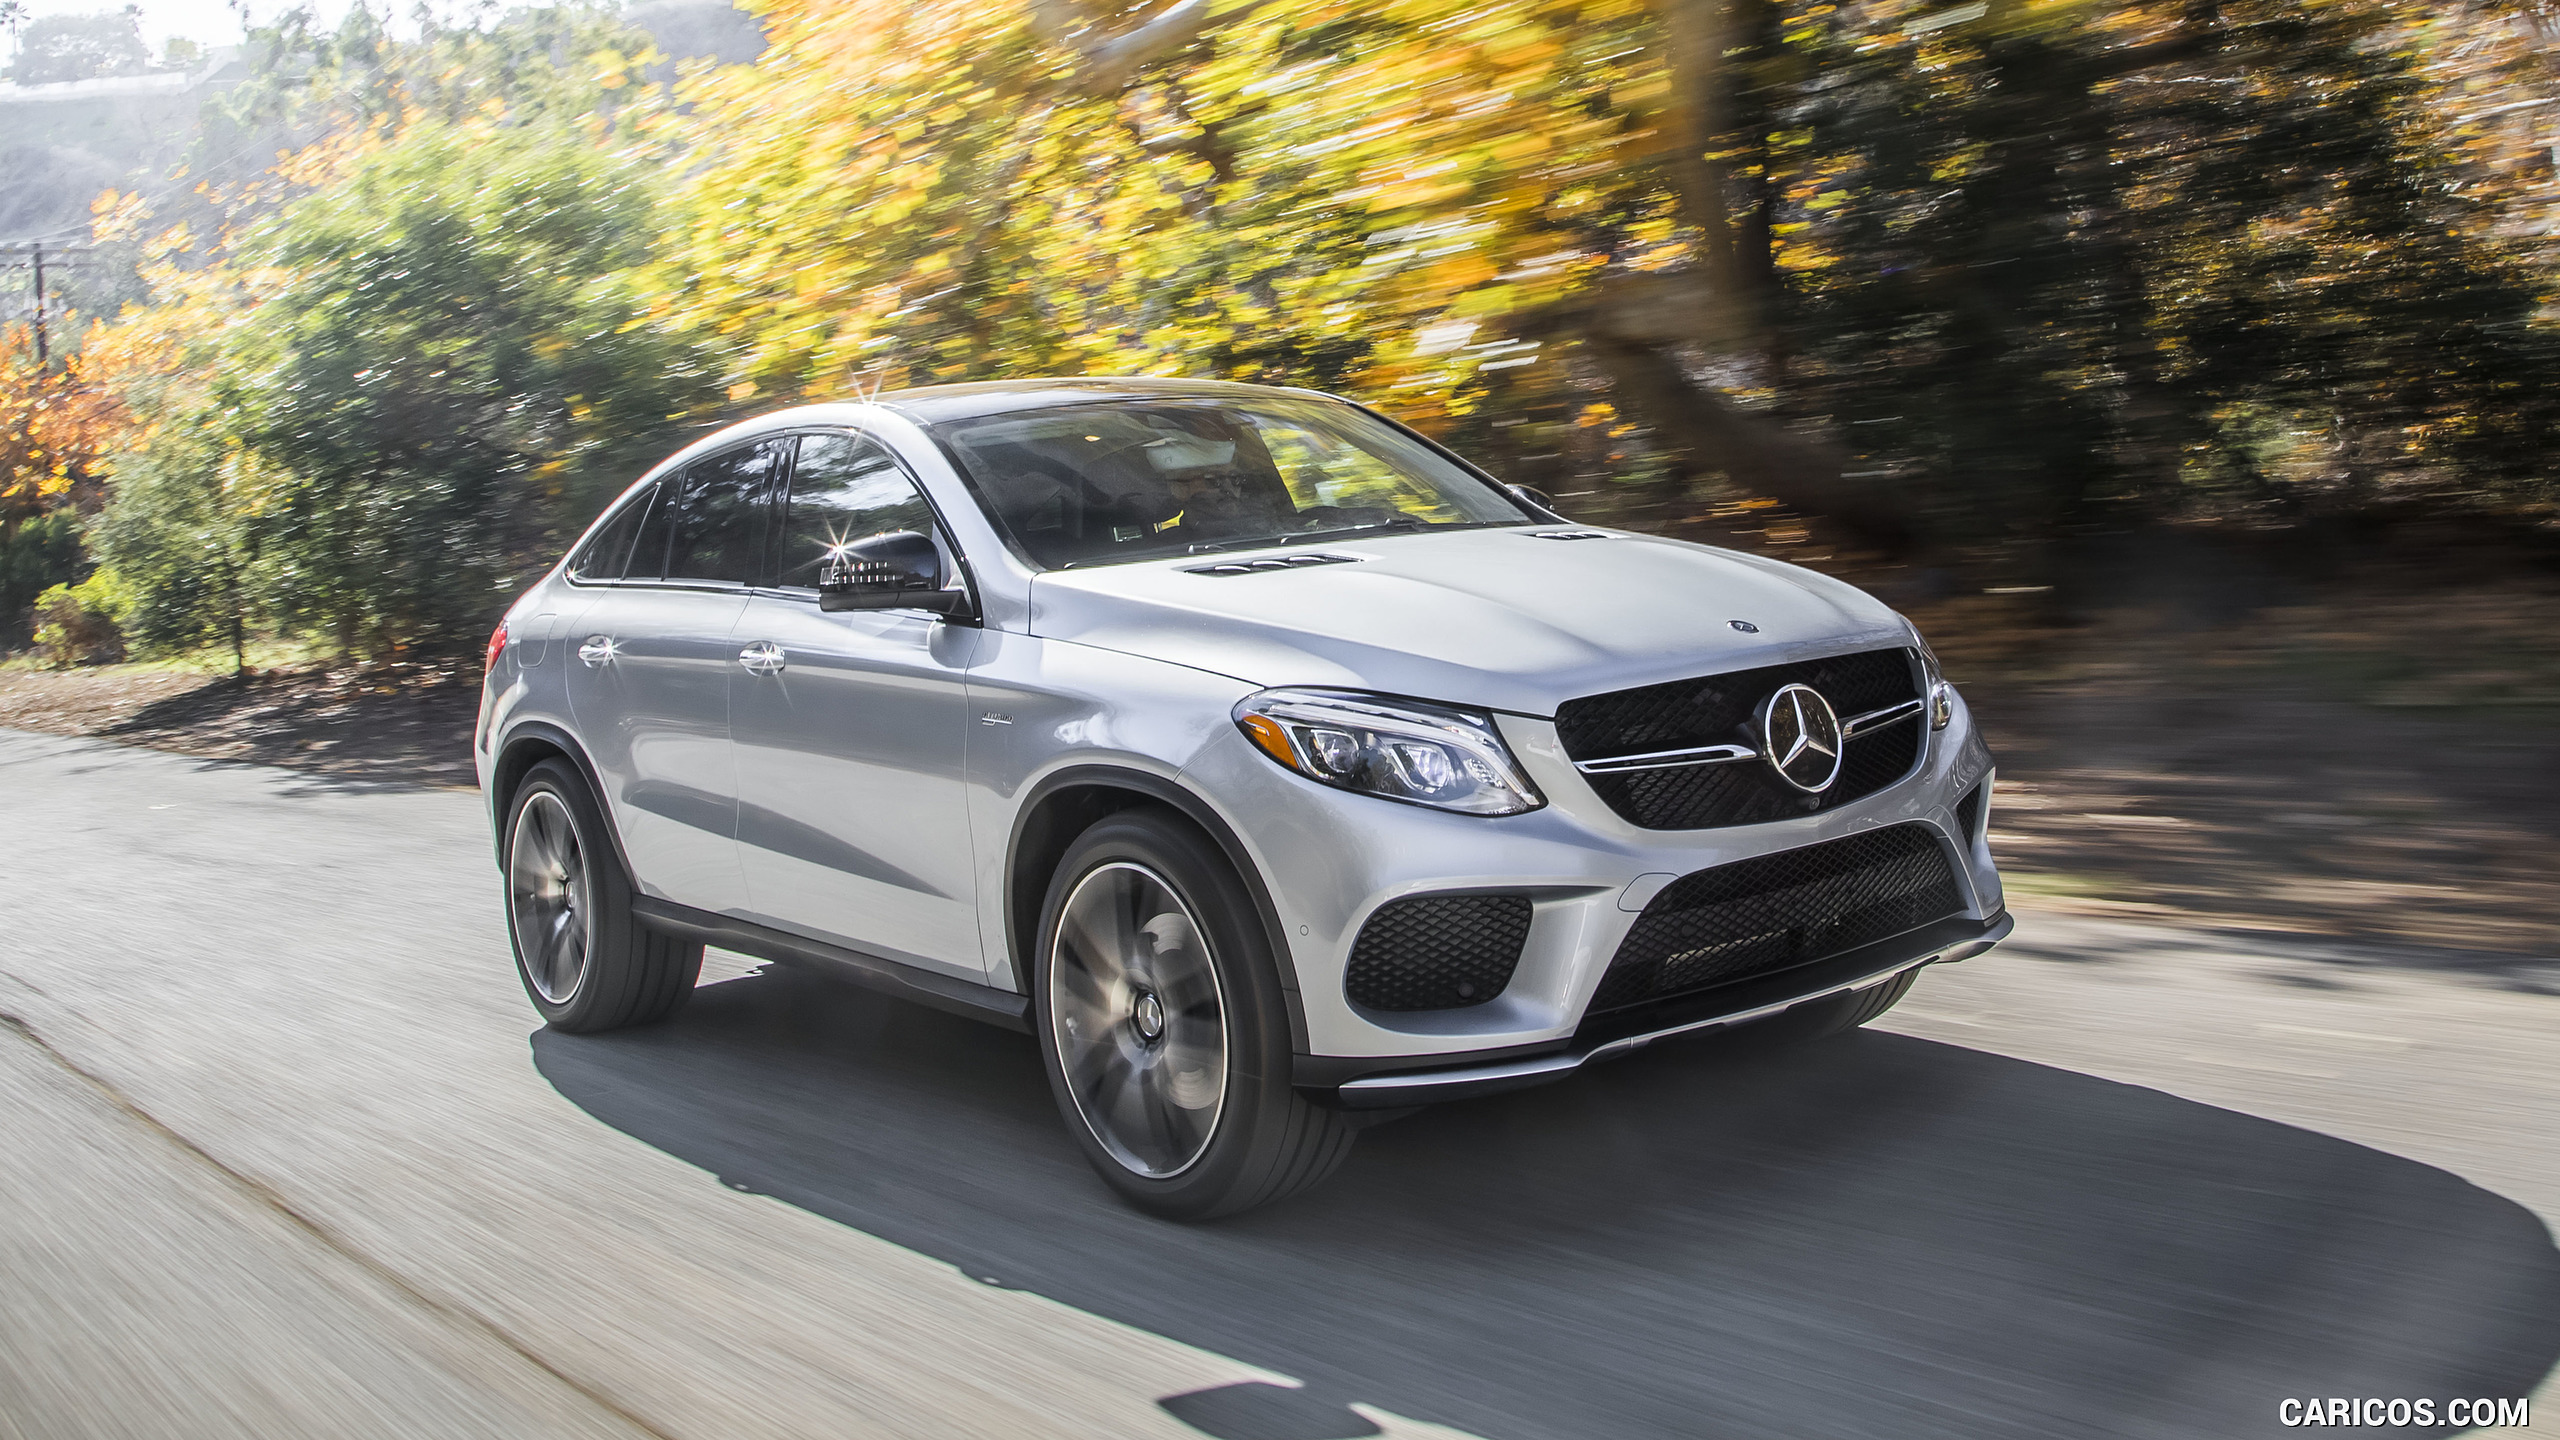 2017 Mercedes-AMG GLE 43 Coupe (US-Spec) - Front Three-Quarter, #1 of 29